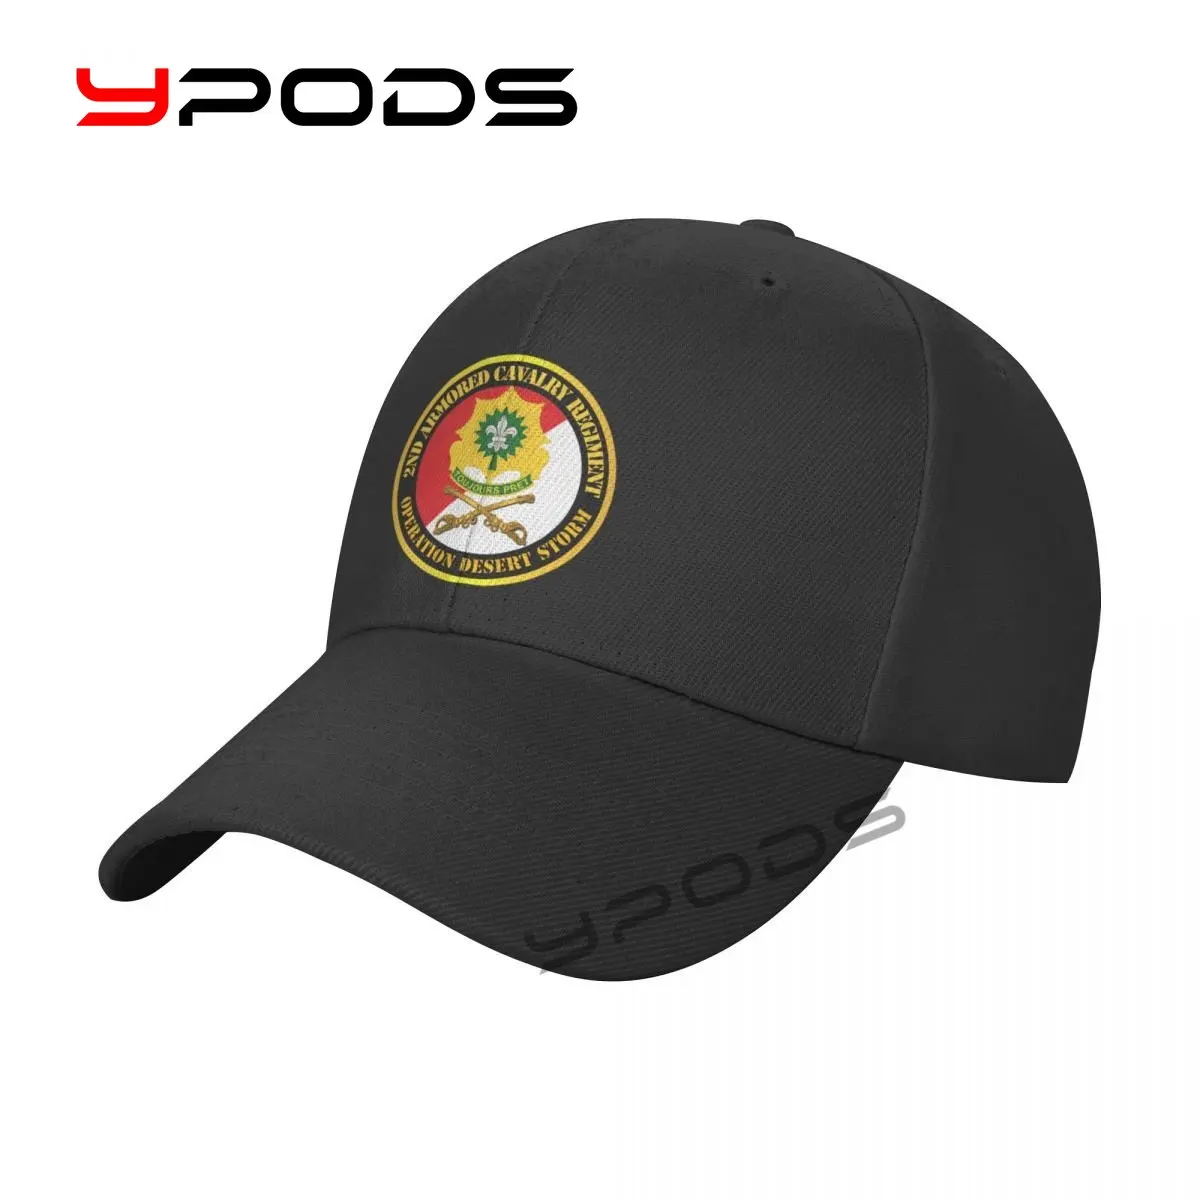 

Plain Solid Color Baseball Caps 2nd Armored Cavalry Regiment DUI -Red White Always Ready Multicolor Visor Hat Casual Sports Hats